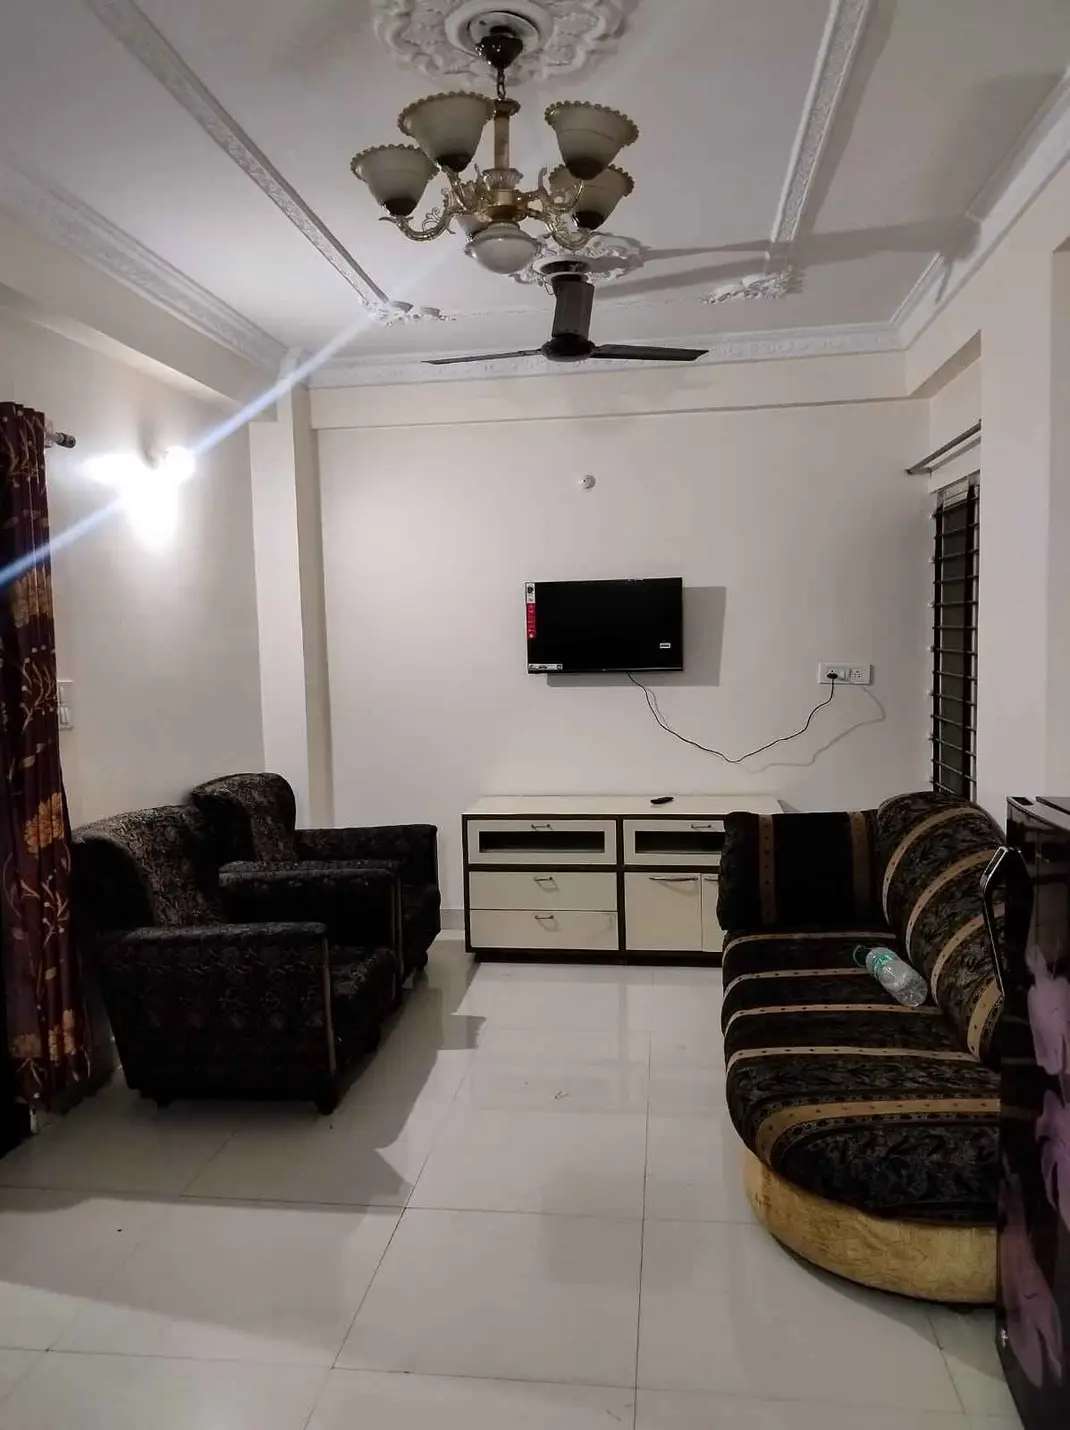 2 Bed/ 2 Bath Rent Apartment/ Flat, Furnished for rent @Ayodhya bypass road Bhopal